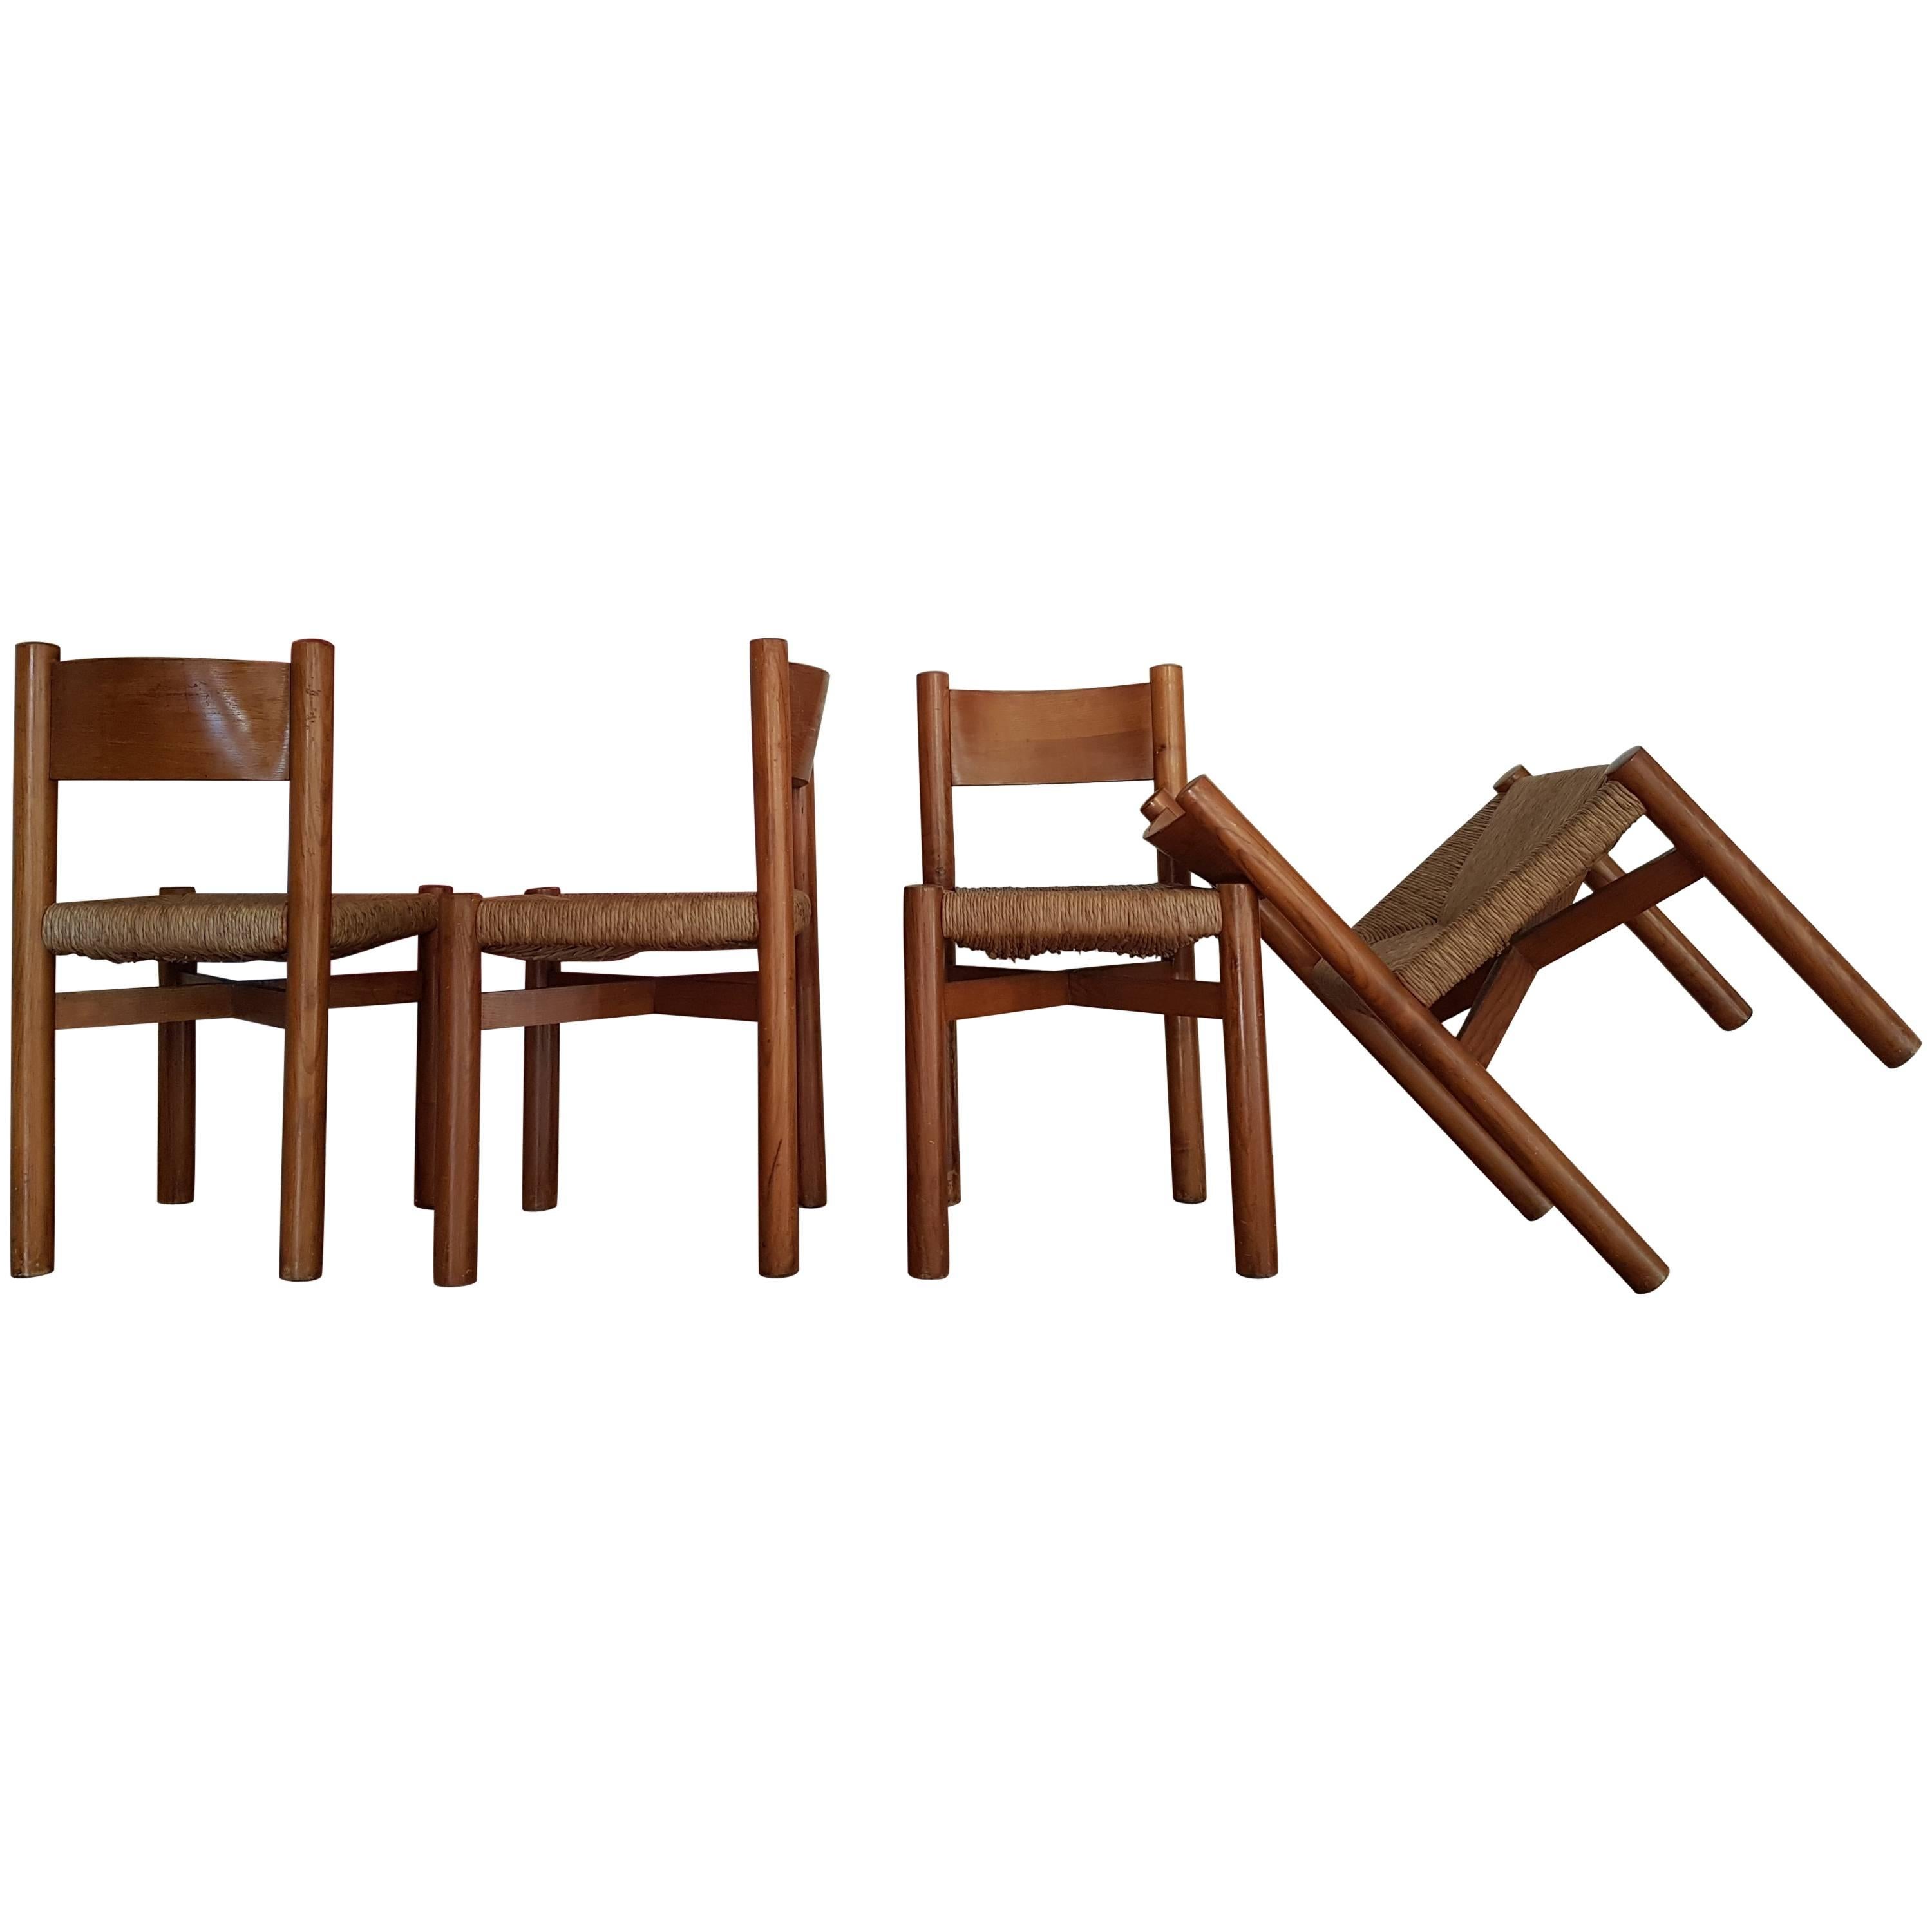 Four Chairs by Charlotte Perriand for Meribel, 1960 Ashwood